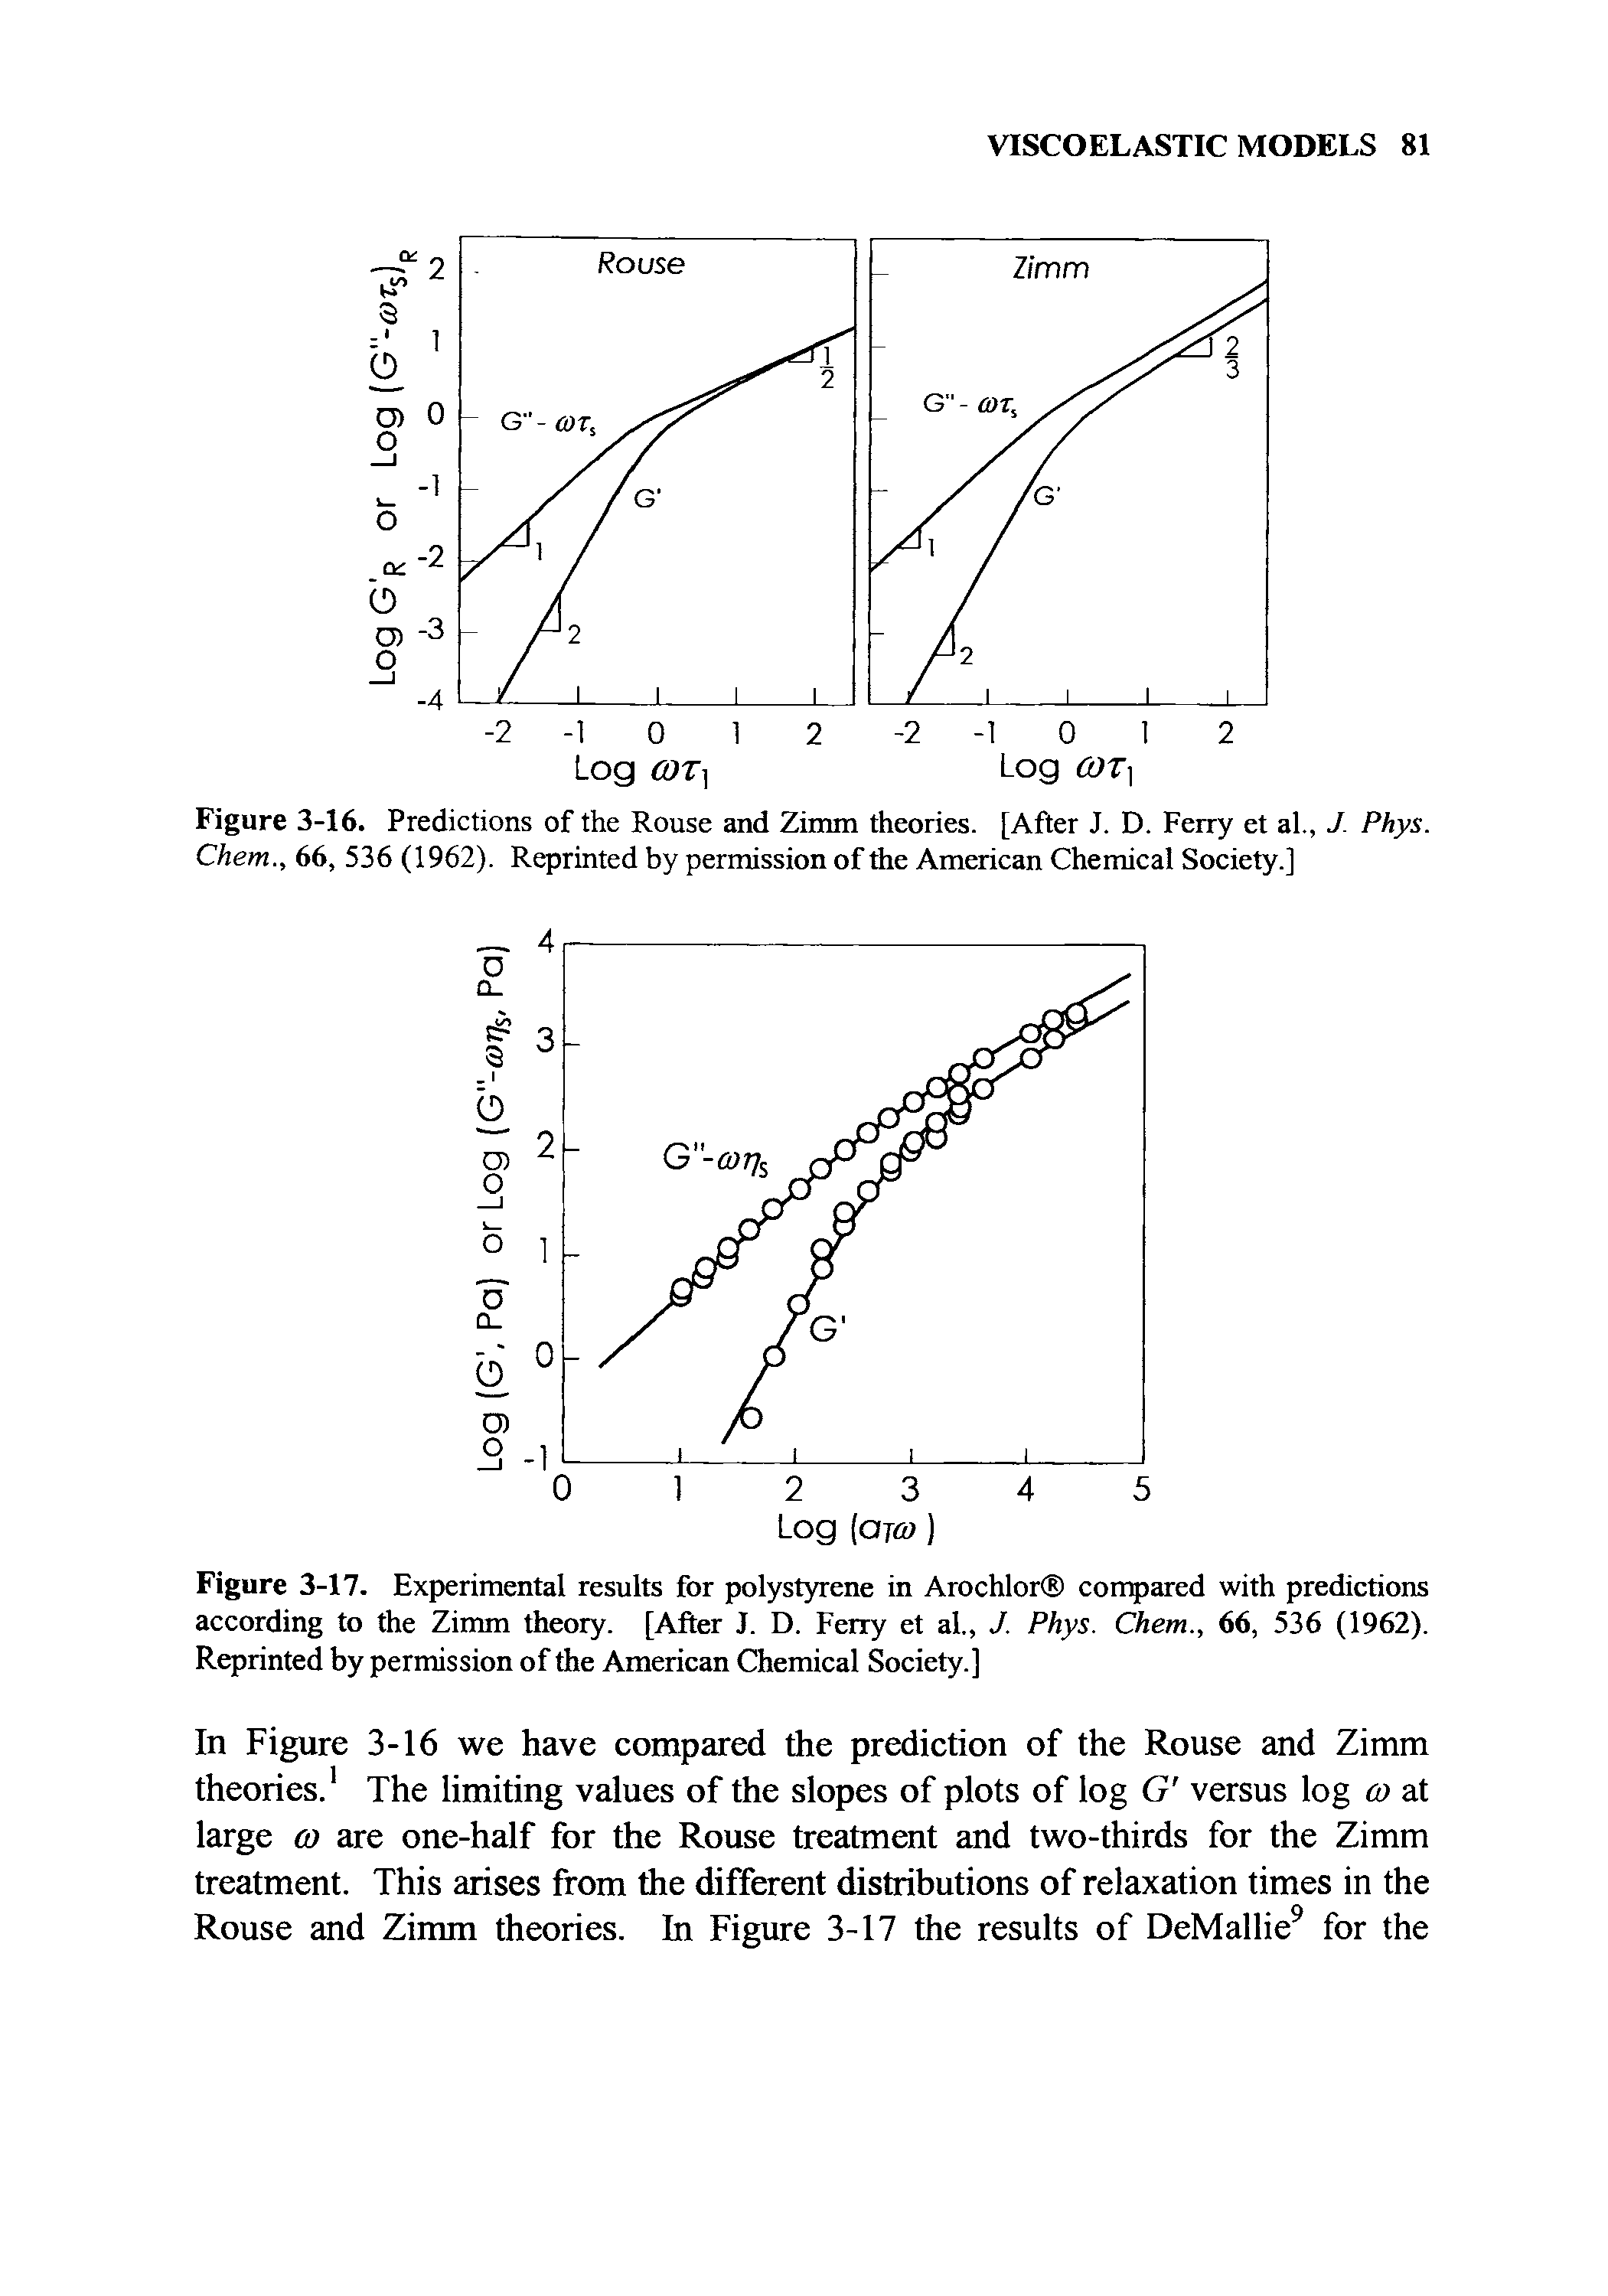 Figure 3-16. Predictions of the Rouse and Zimm theories. [After J. D. Ferry et al., J. Phys. Chem., 66, 536 (1962). Reprinted by permission of the American Chemical Society.]...